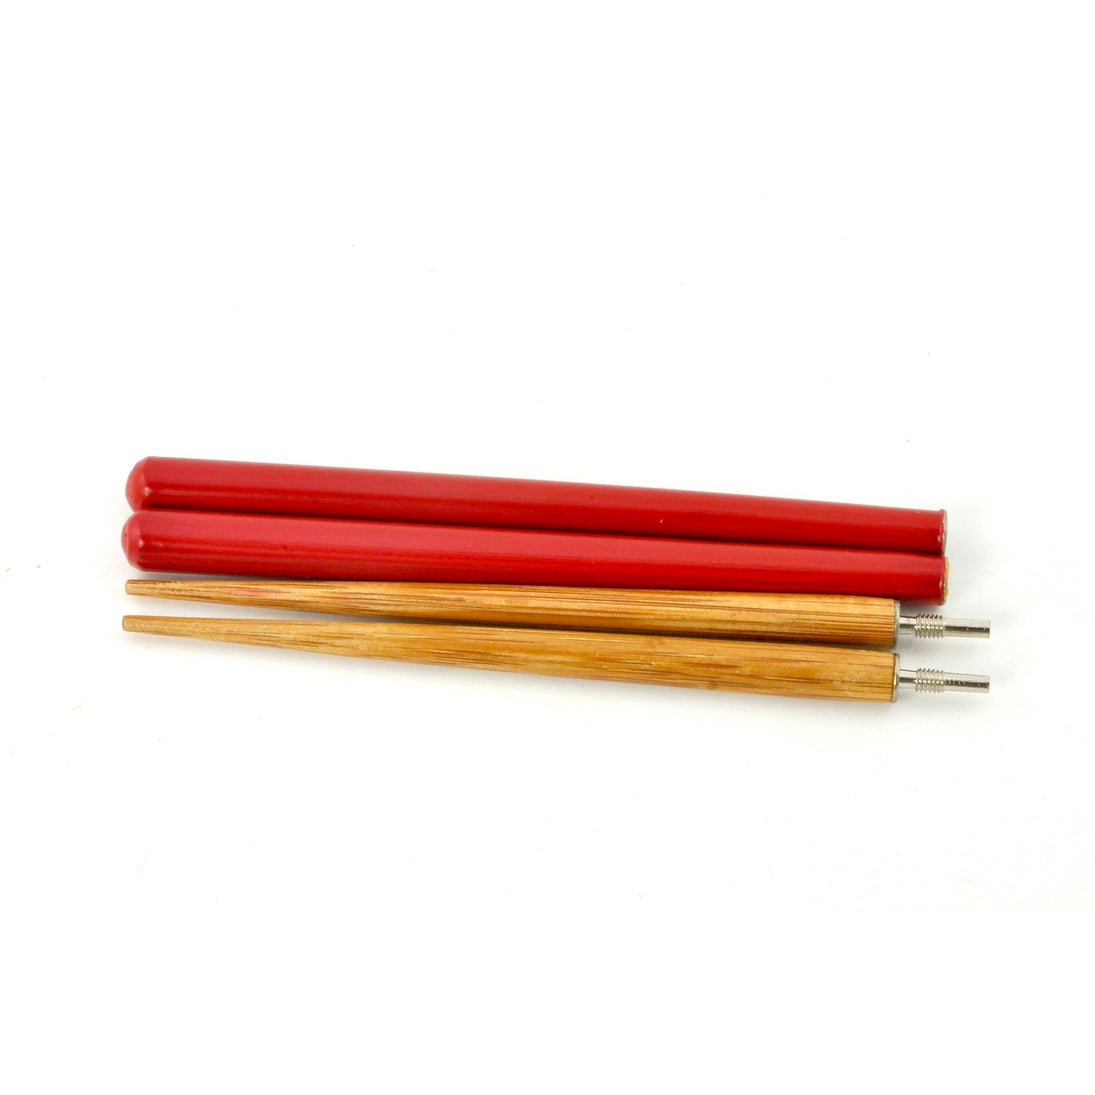 Integral Design's Collapsible Portable Chopsticks — Tools and Toys